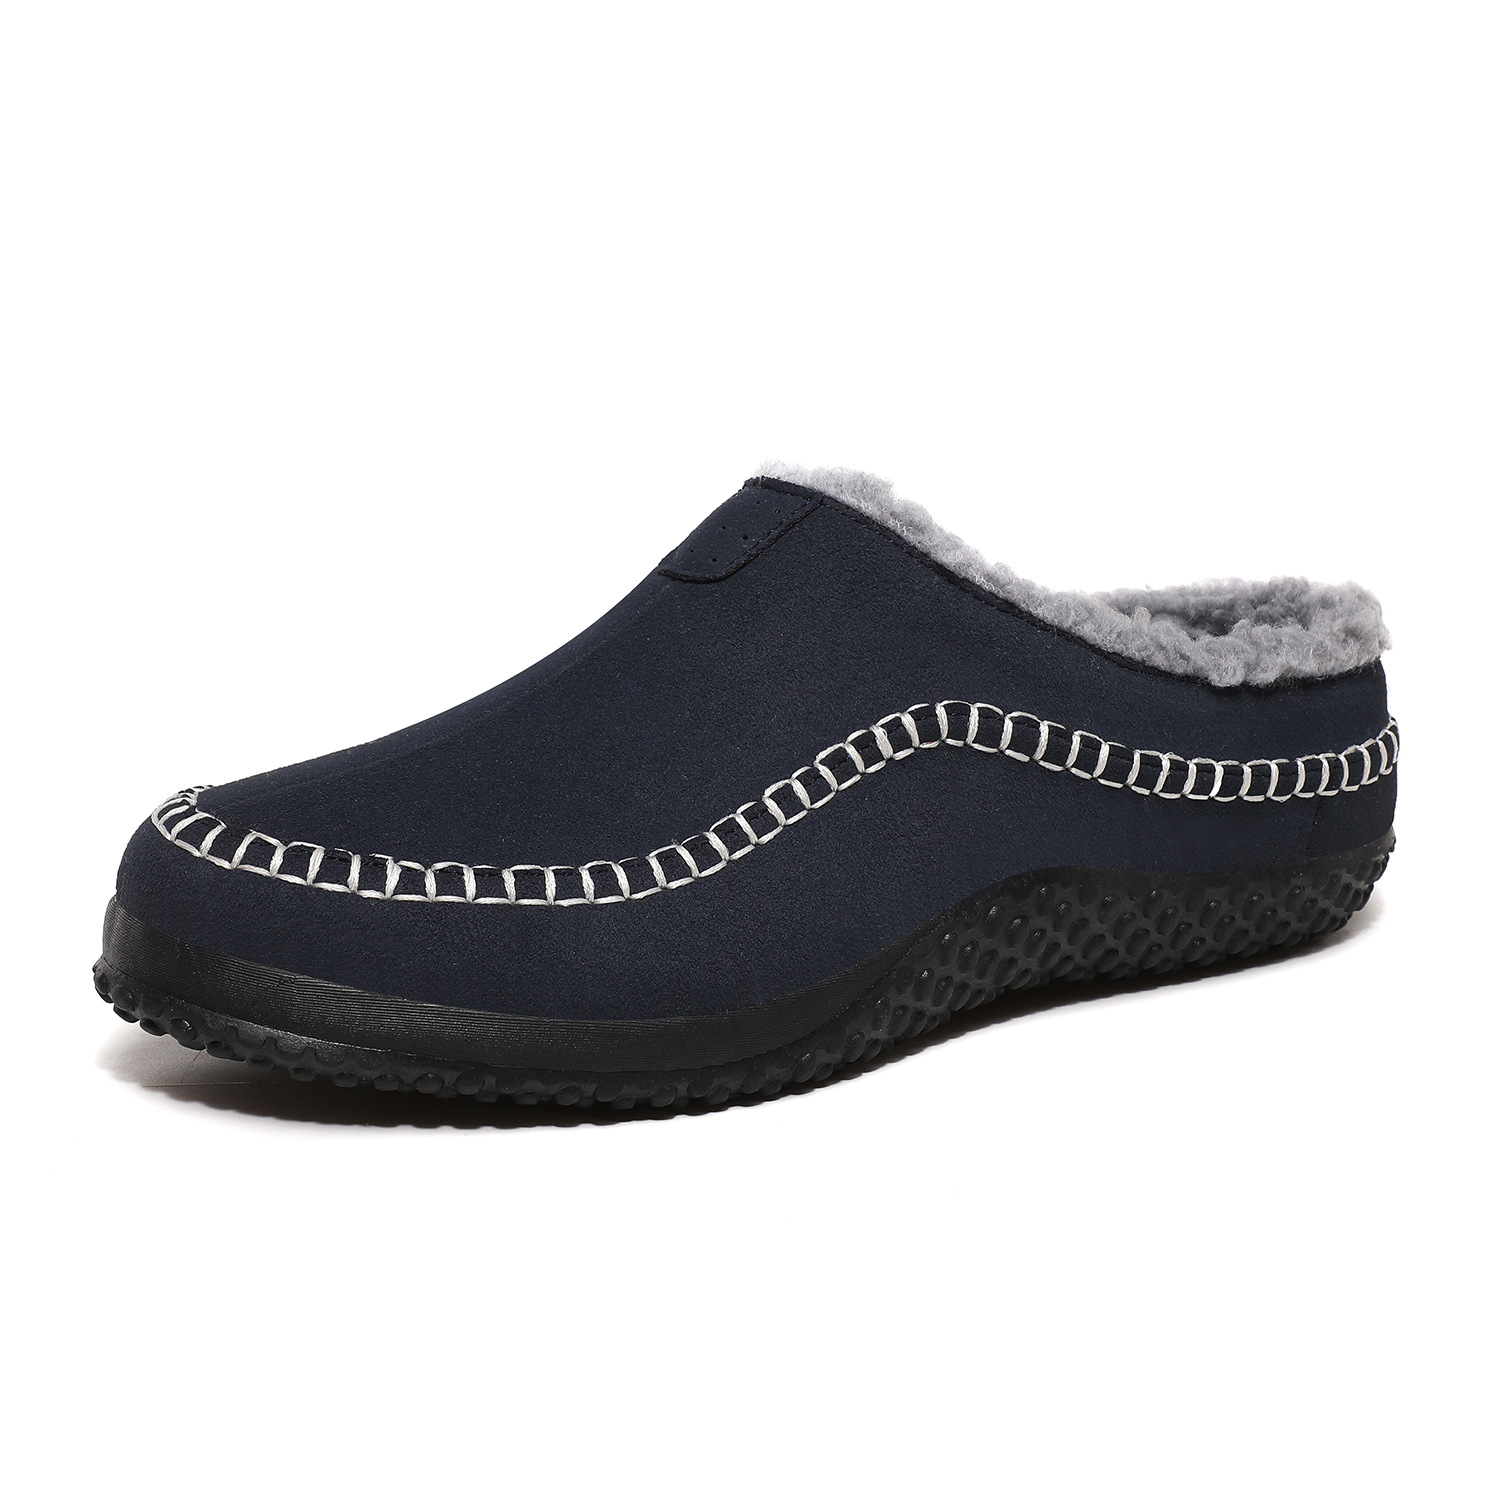 Warm Fuzzy Comfy House Shoes For Men